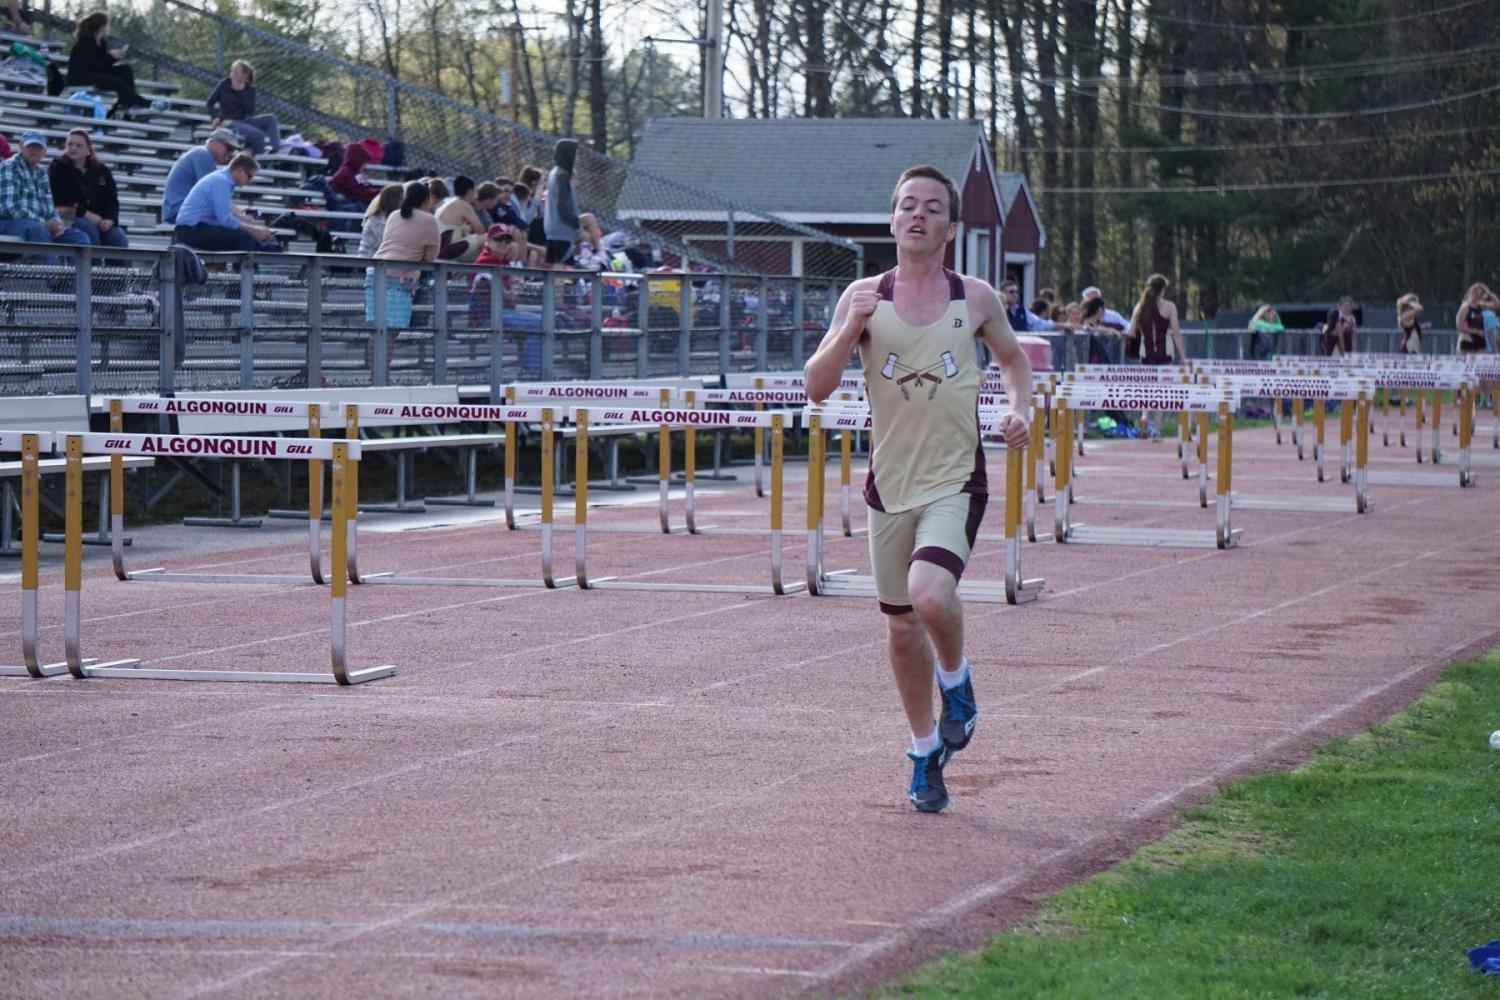 Junior Andrew Michalik sprints  towards the finish line, hoping to win first place.